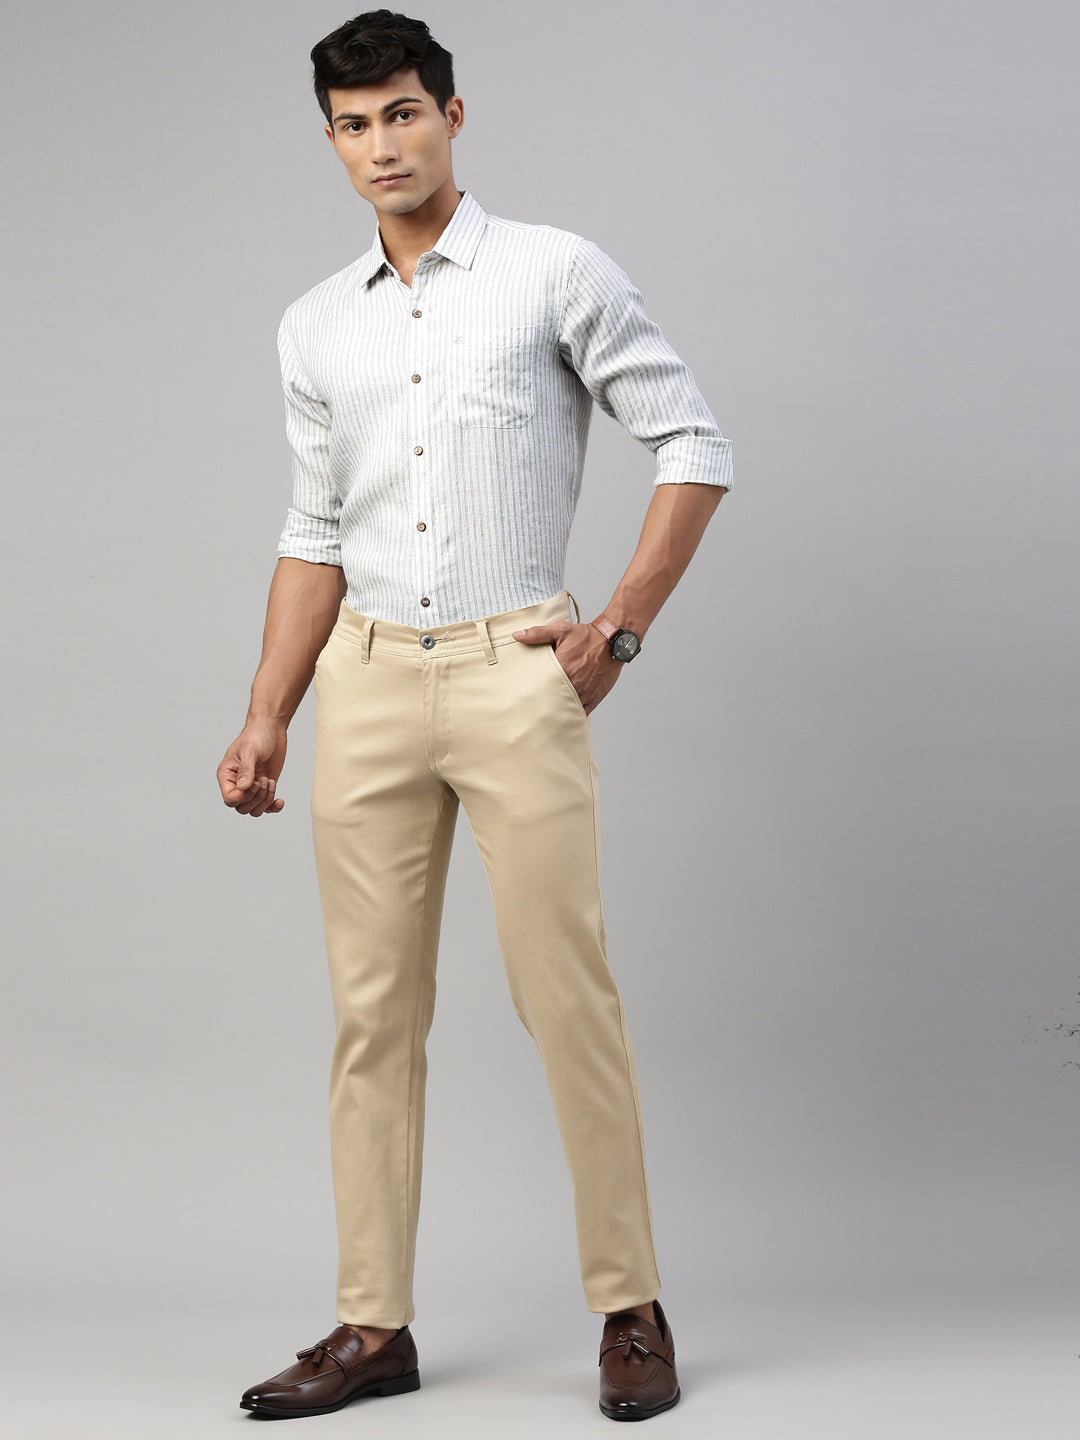 What Color Pants Go With Khaki Beige And Tan Shirts  Ready Sleek